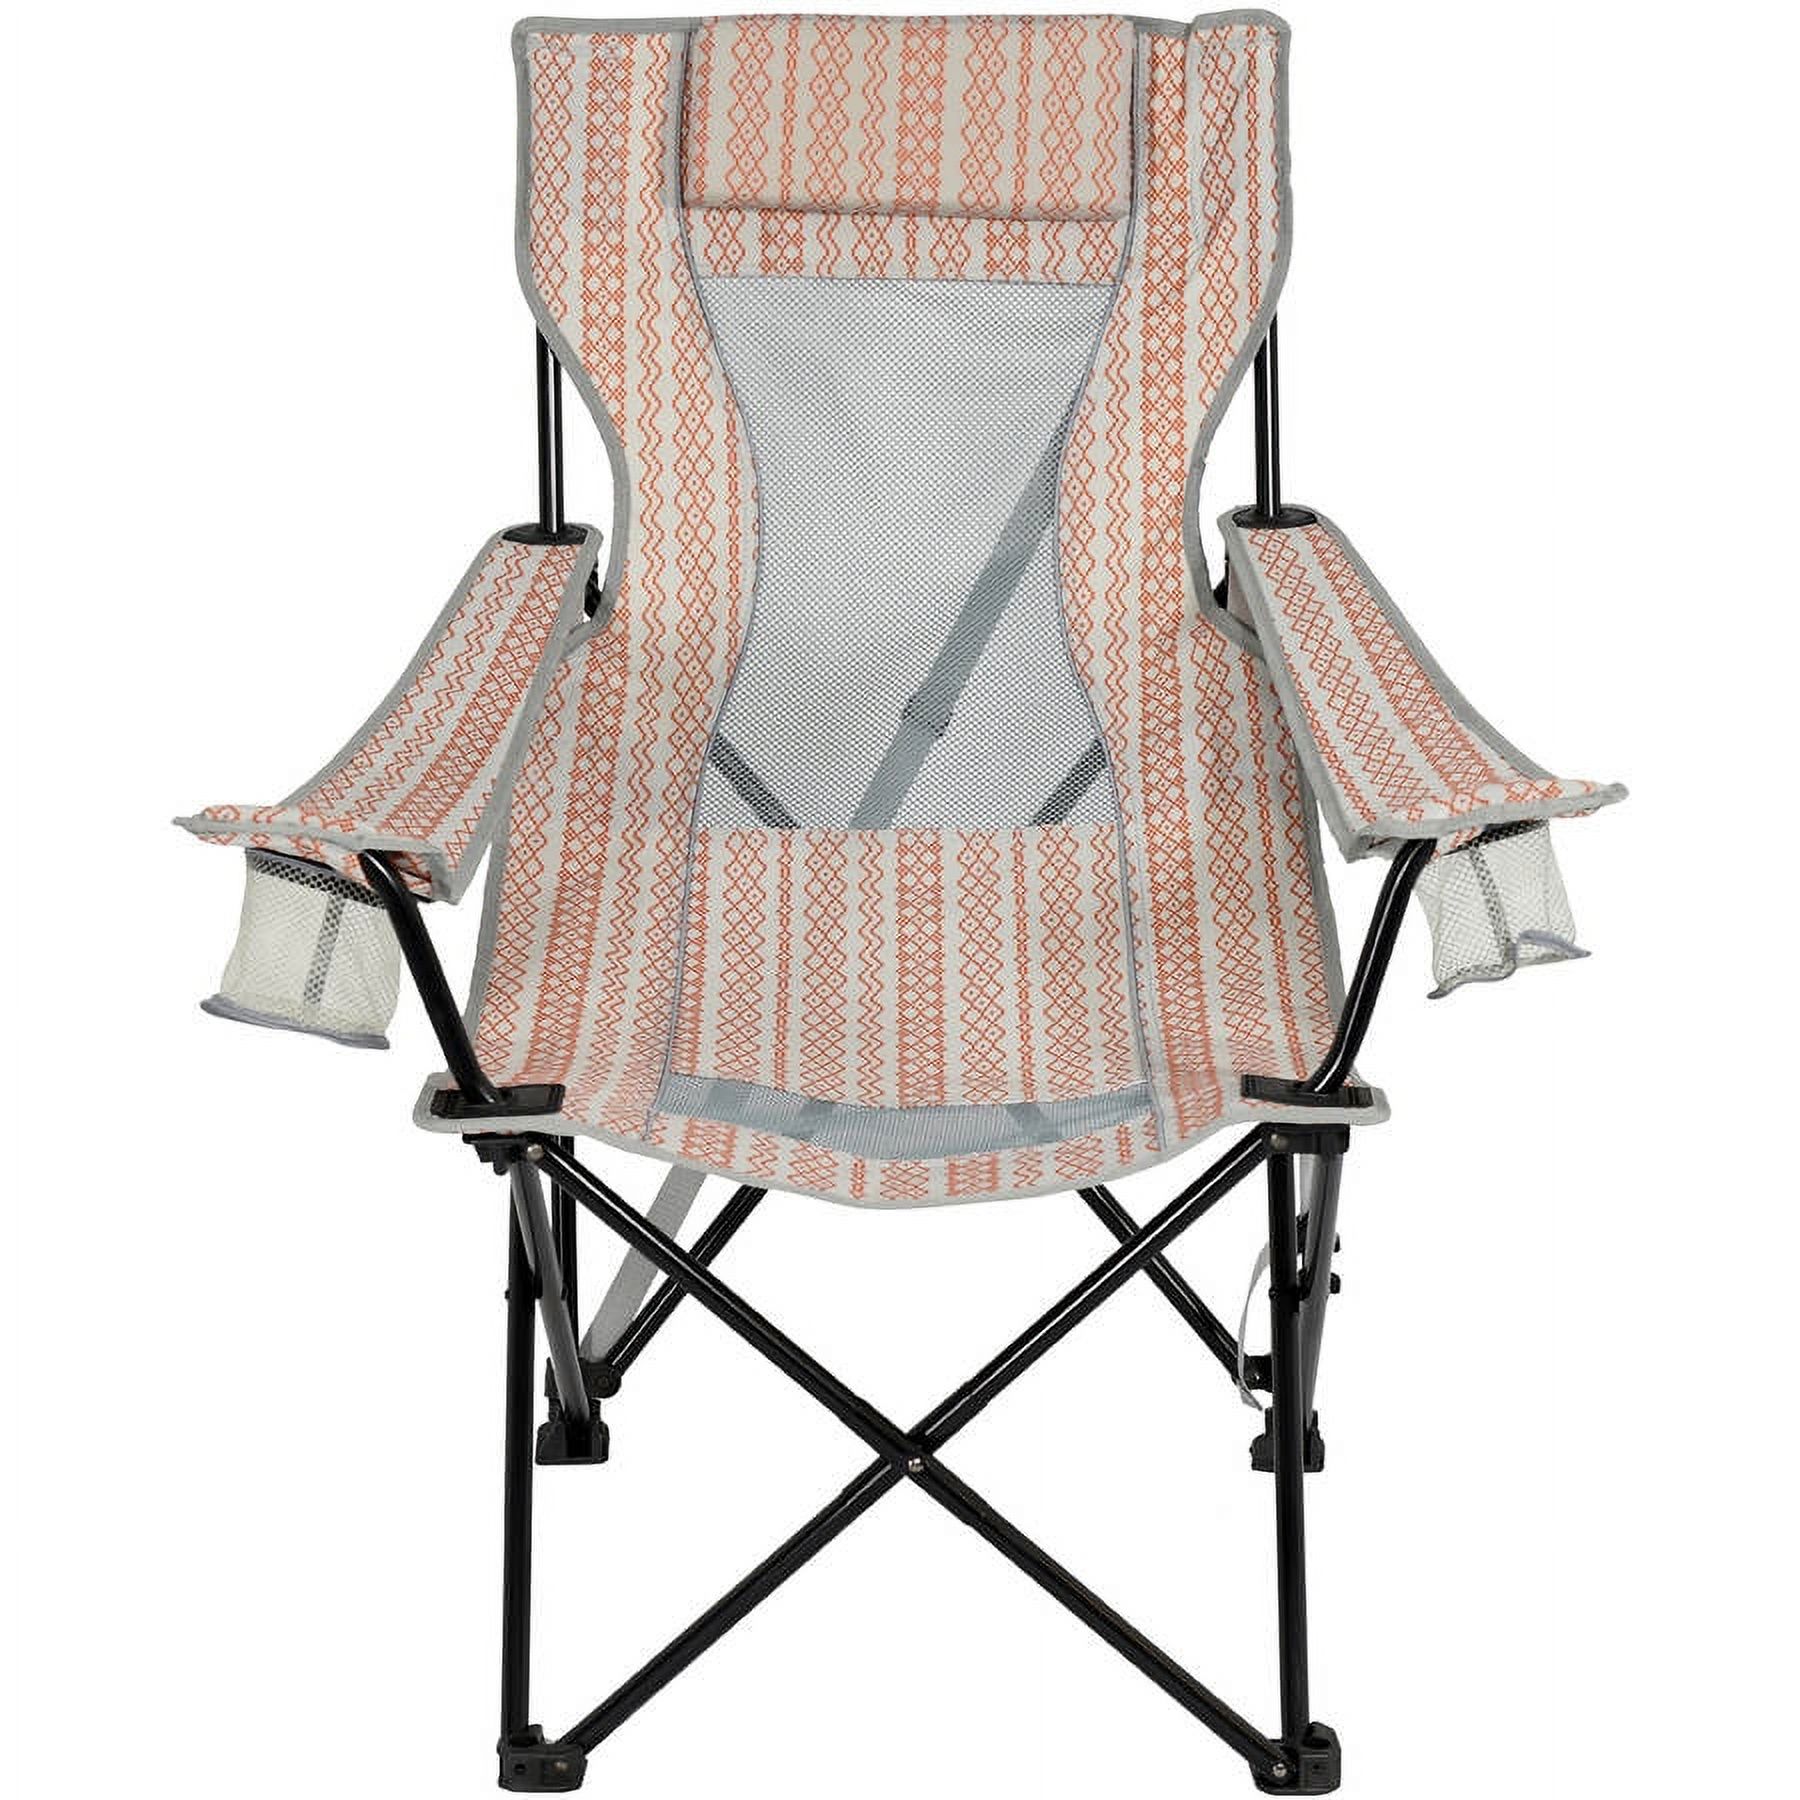 Oversized Mesh Lounge Chair - image 1 of 8